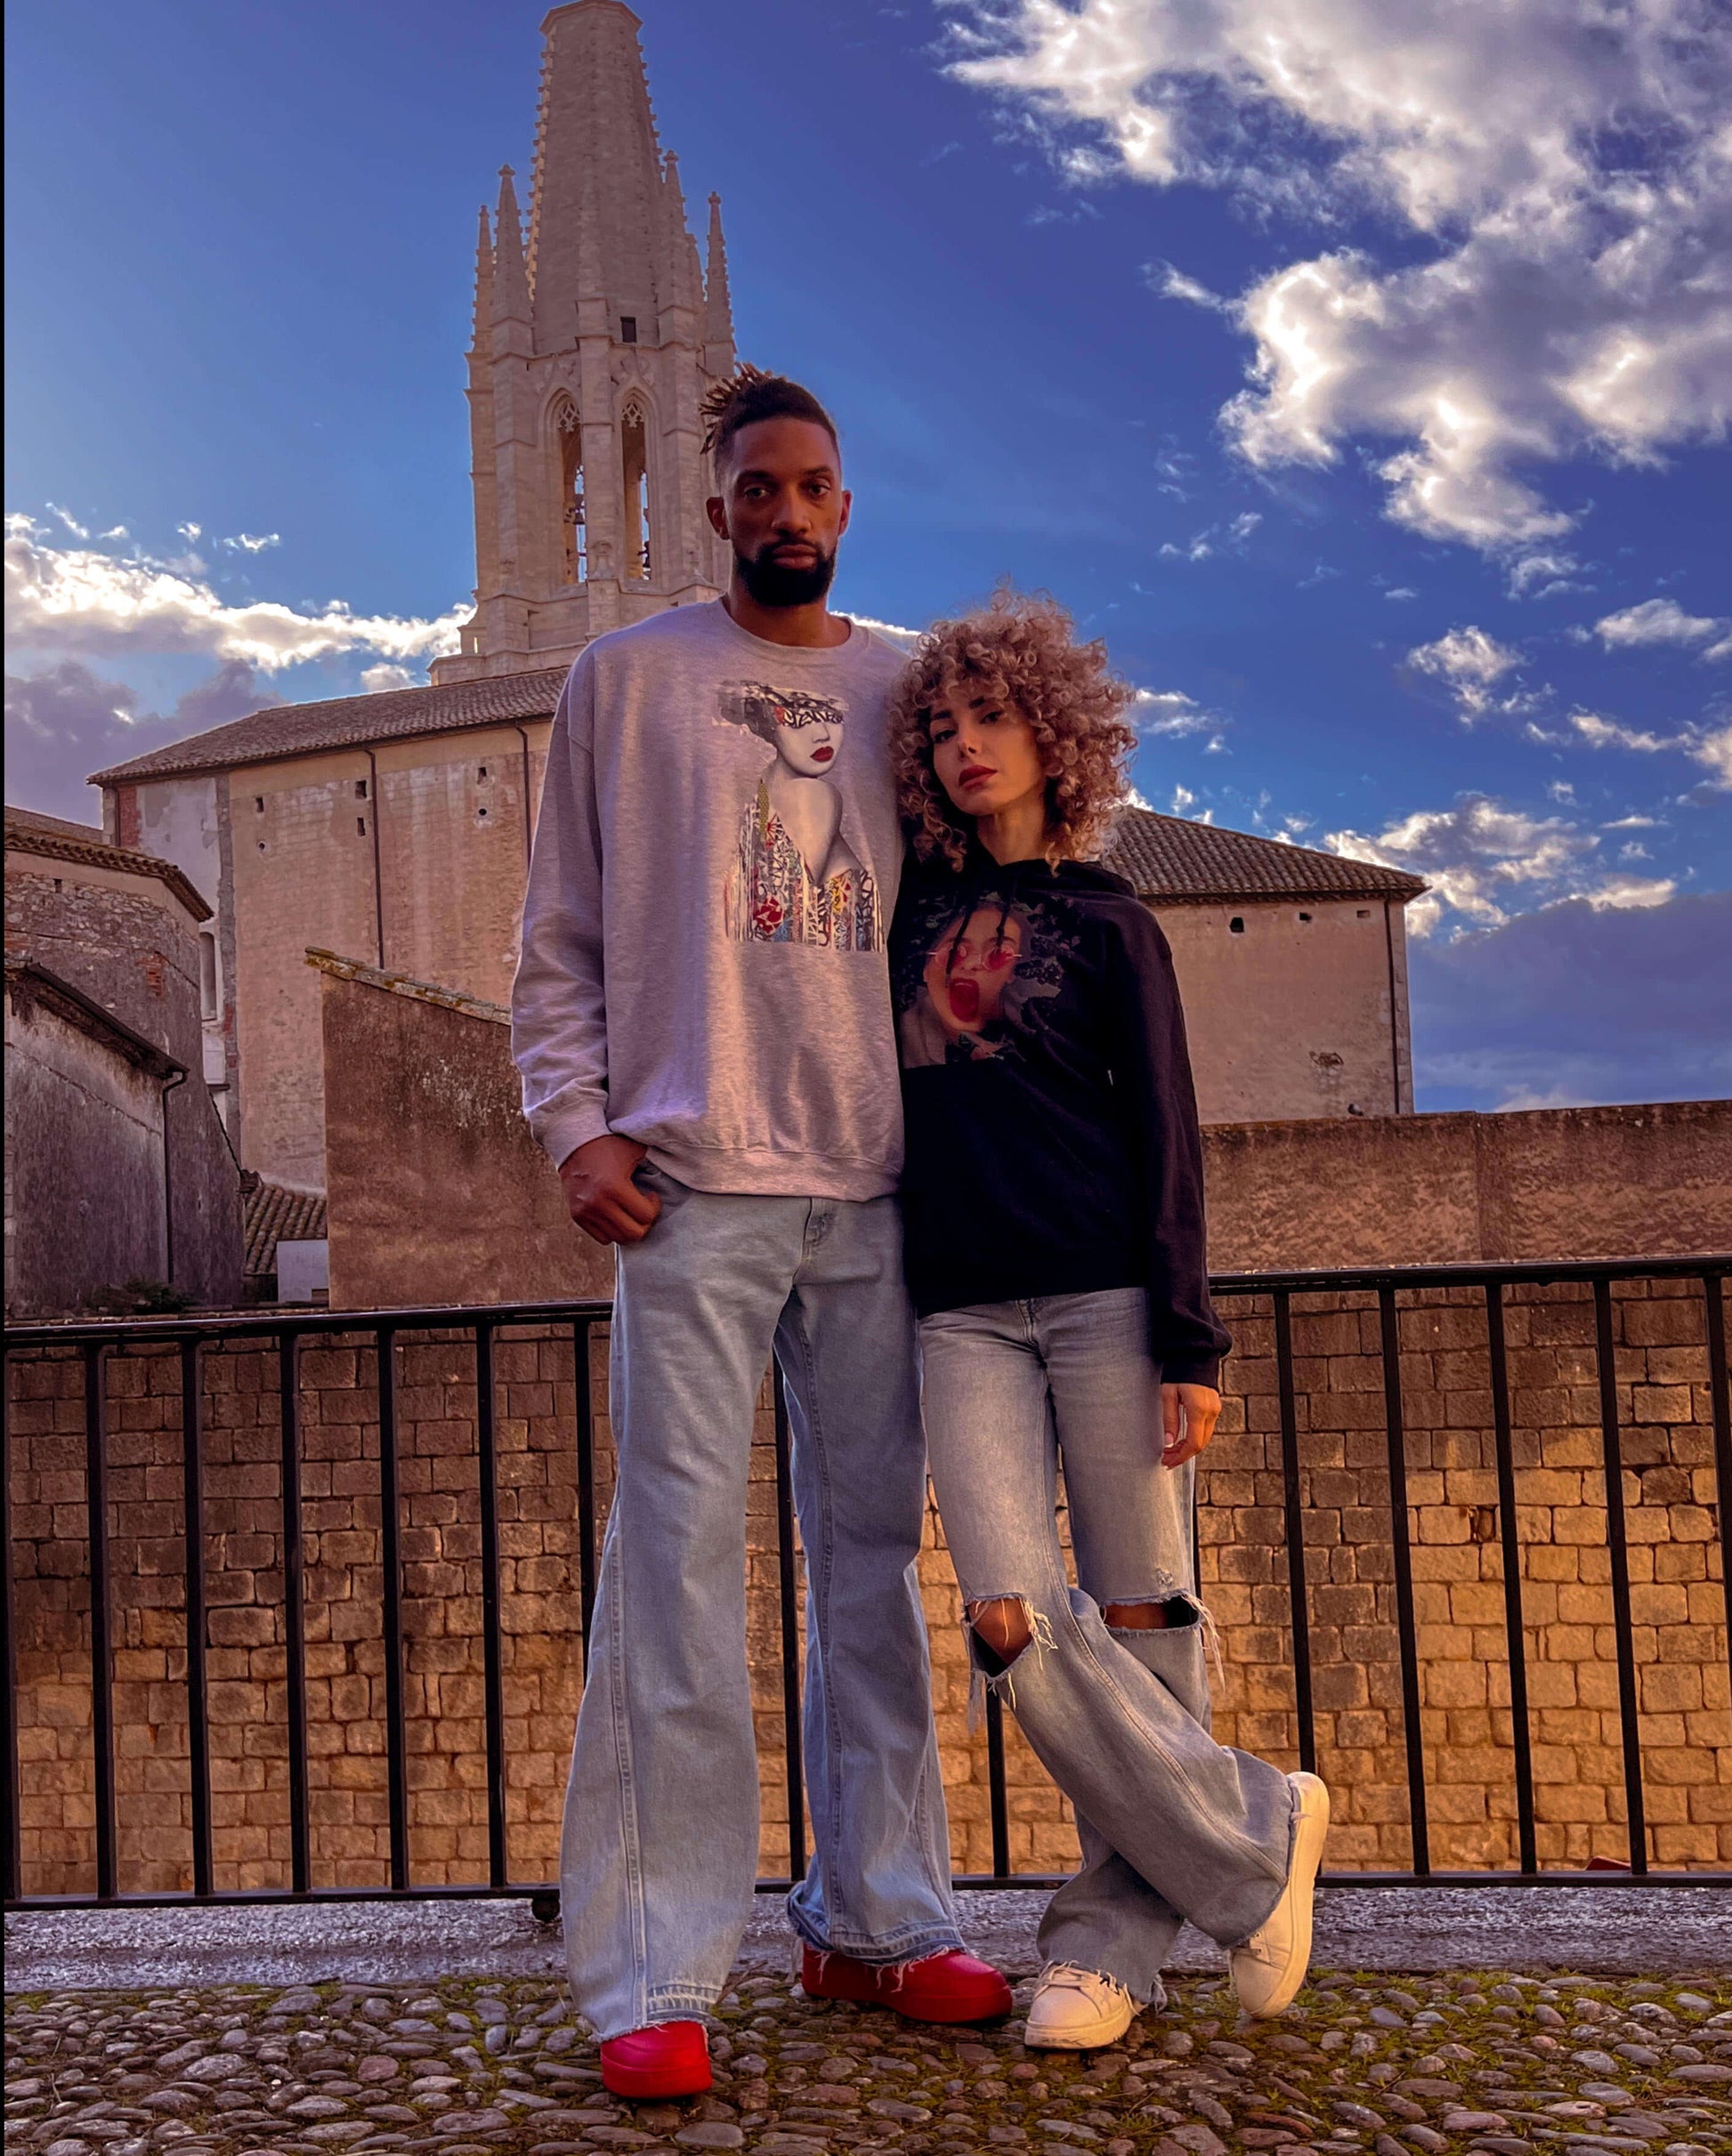 Khem Birch and Salome Saliya together have a unique and fashionable style, wearing the exclusive Z3al sweaters.